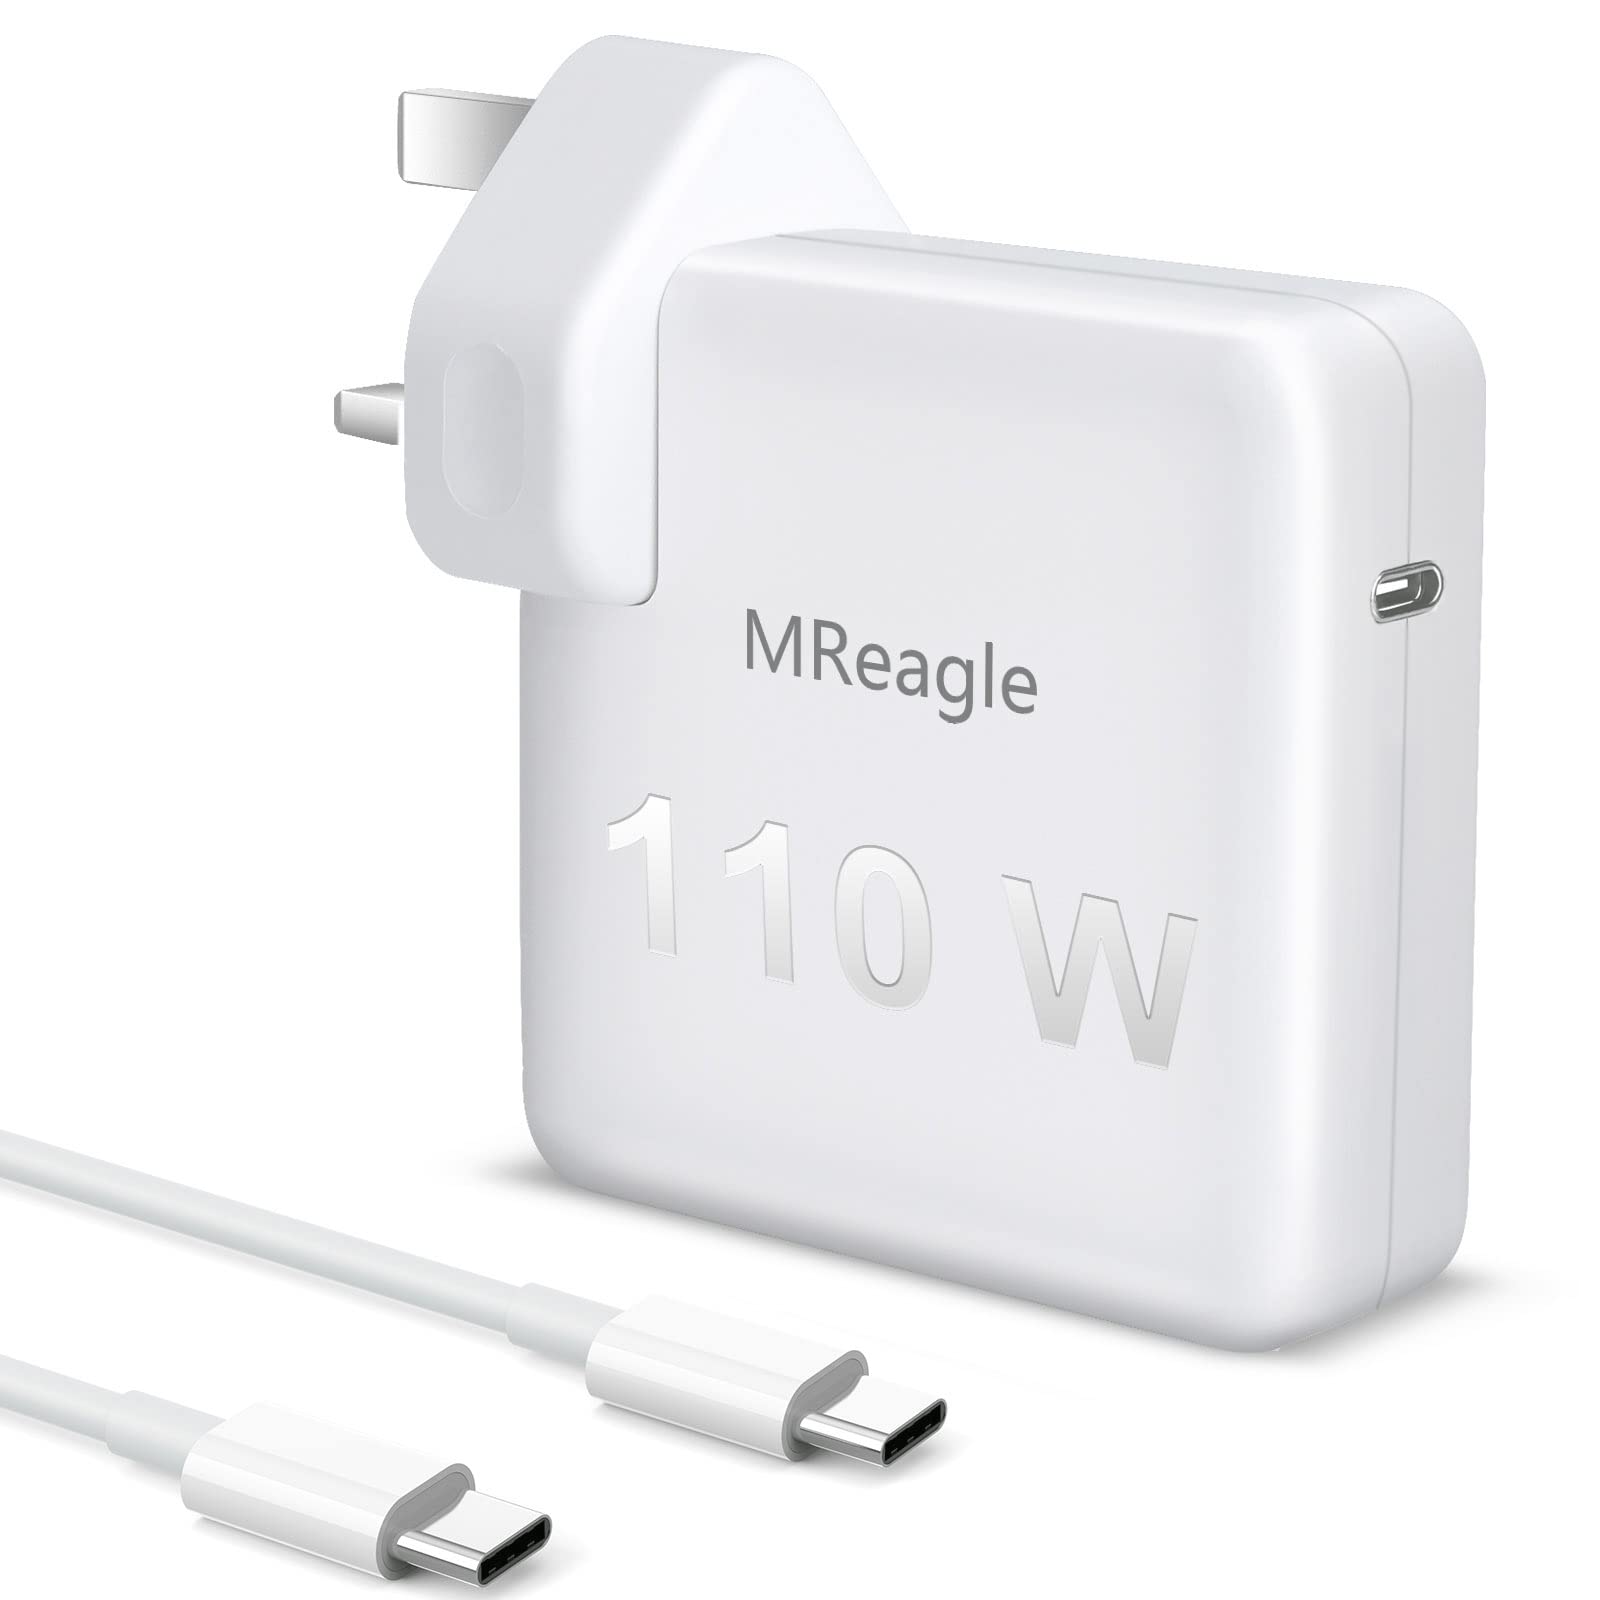 MReagle MacBook Pro Charger, 110W USB C Charger for Mac Pro, Macbook Air Charger Plug Adaptor with 1.8m C to C Cable, Compatible with MacBook Pro 16, 15, 14, 13, and More